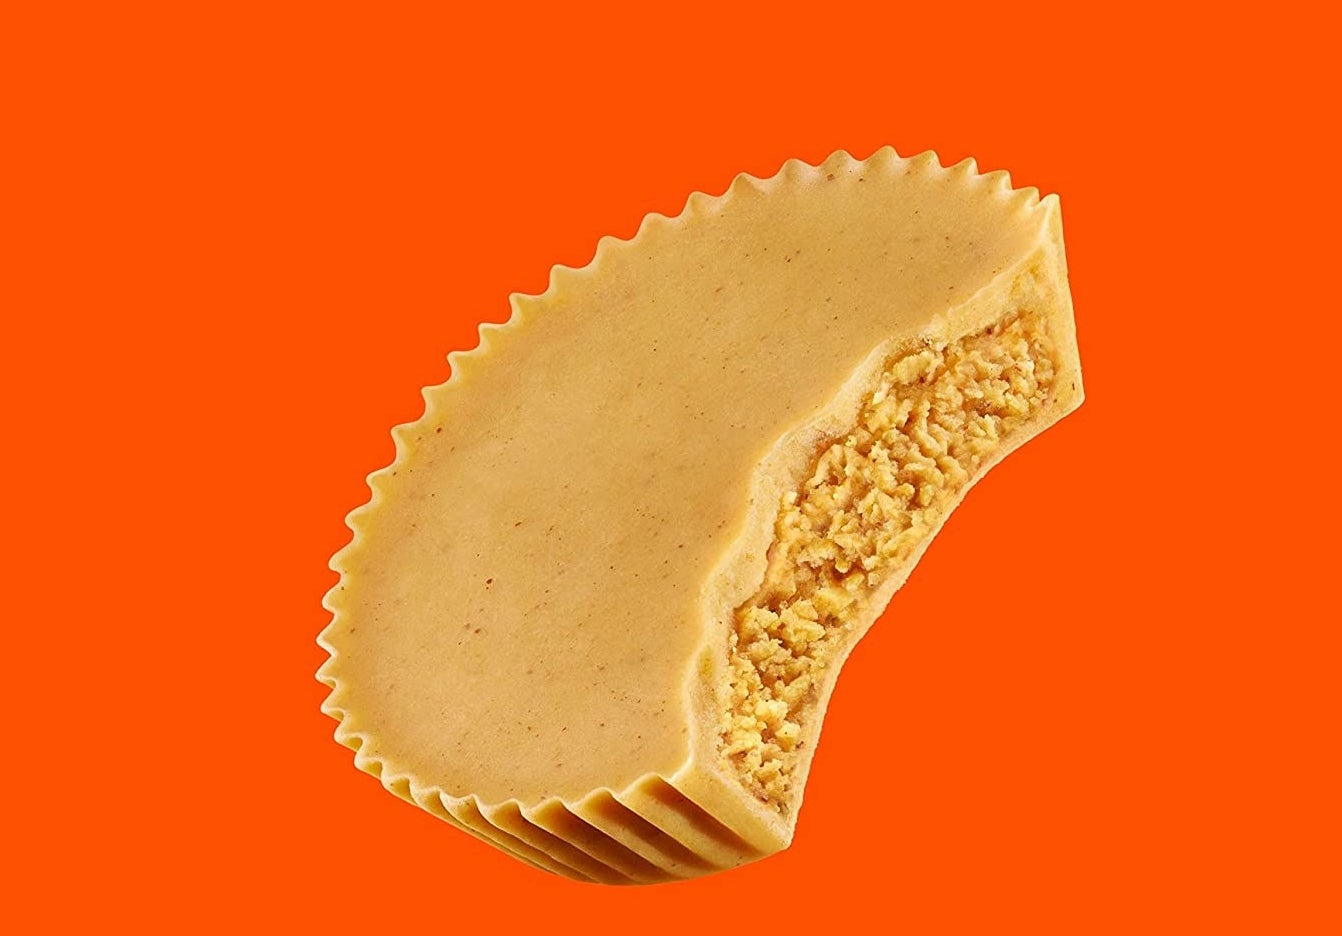 The peanut butter cup